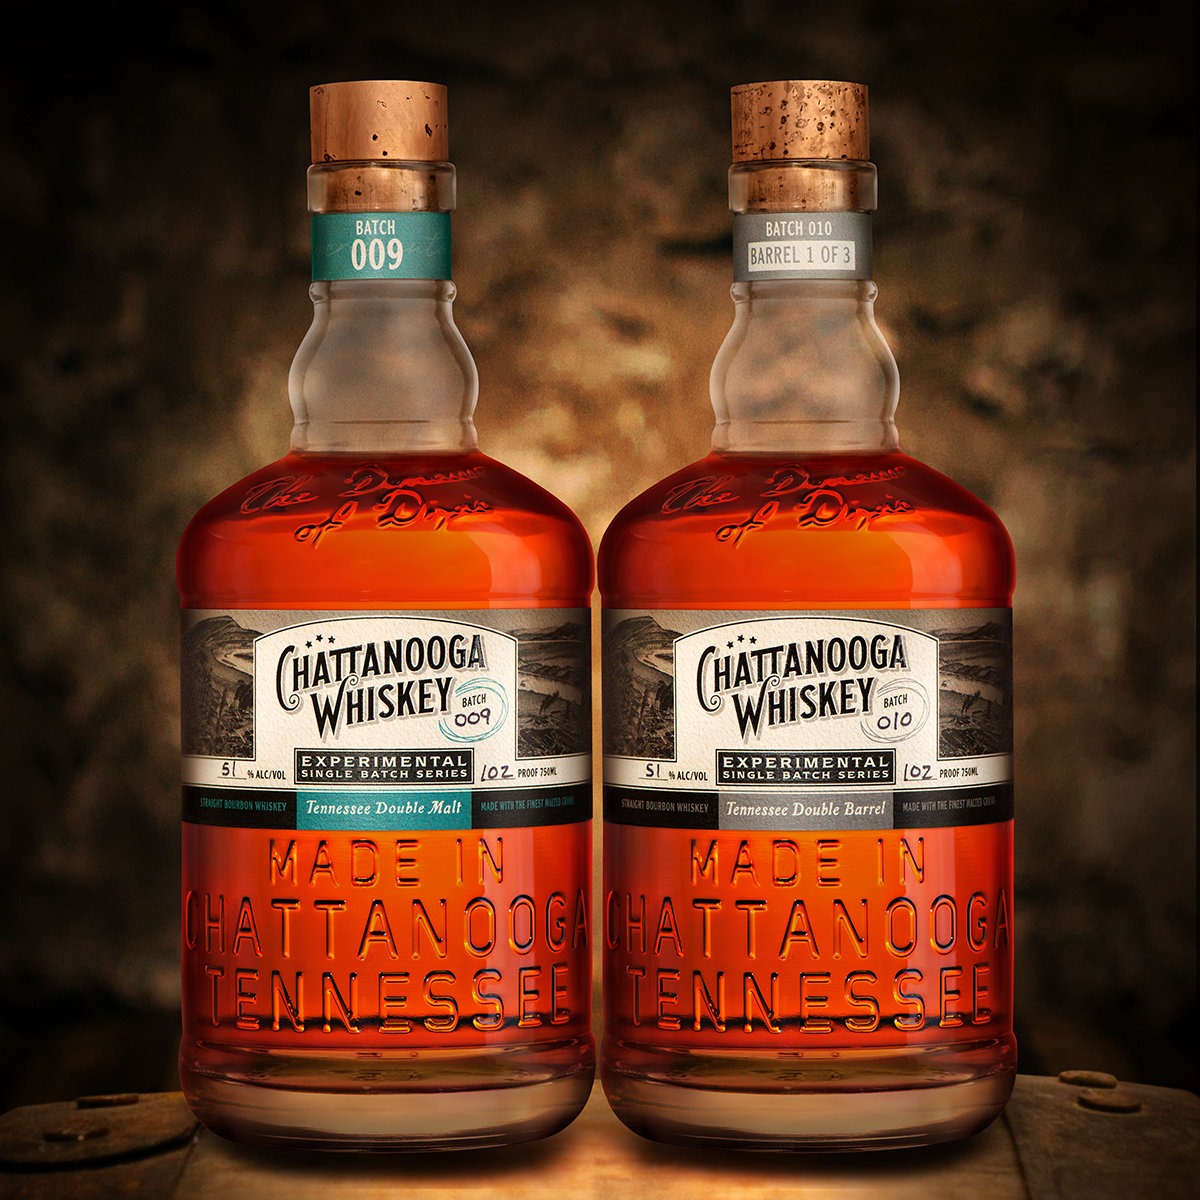 Announcing the newest additions to our Award Winning Distiller’s Experimental Series: Batch 009 & 010!